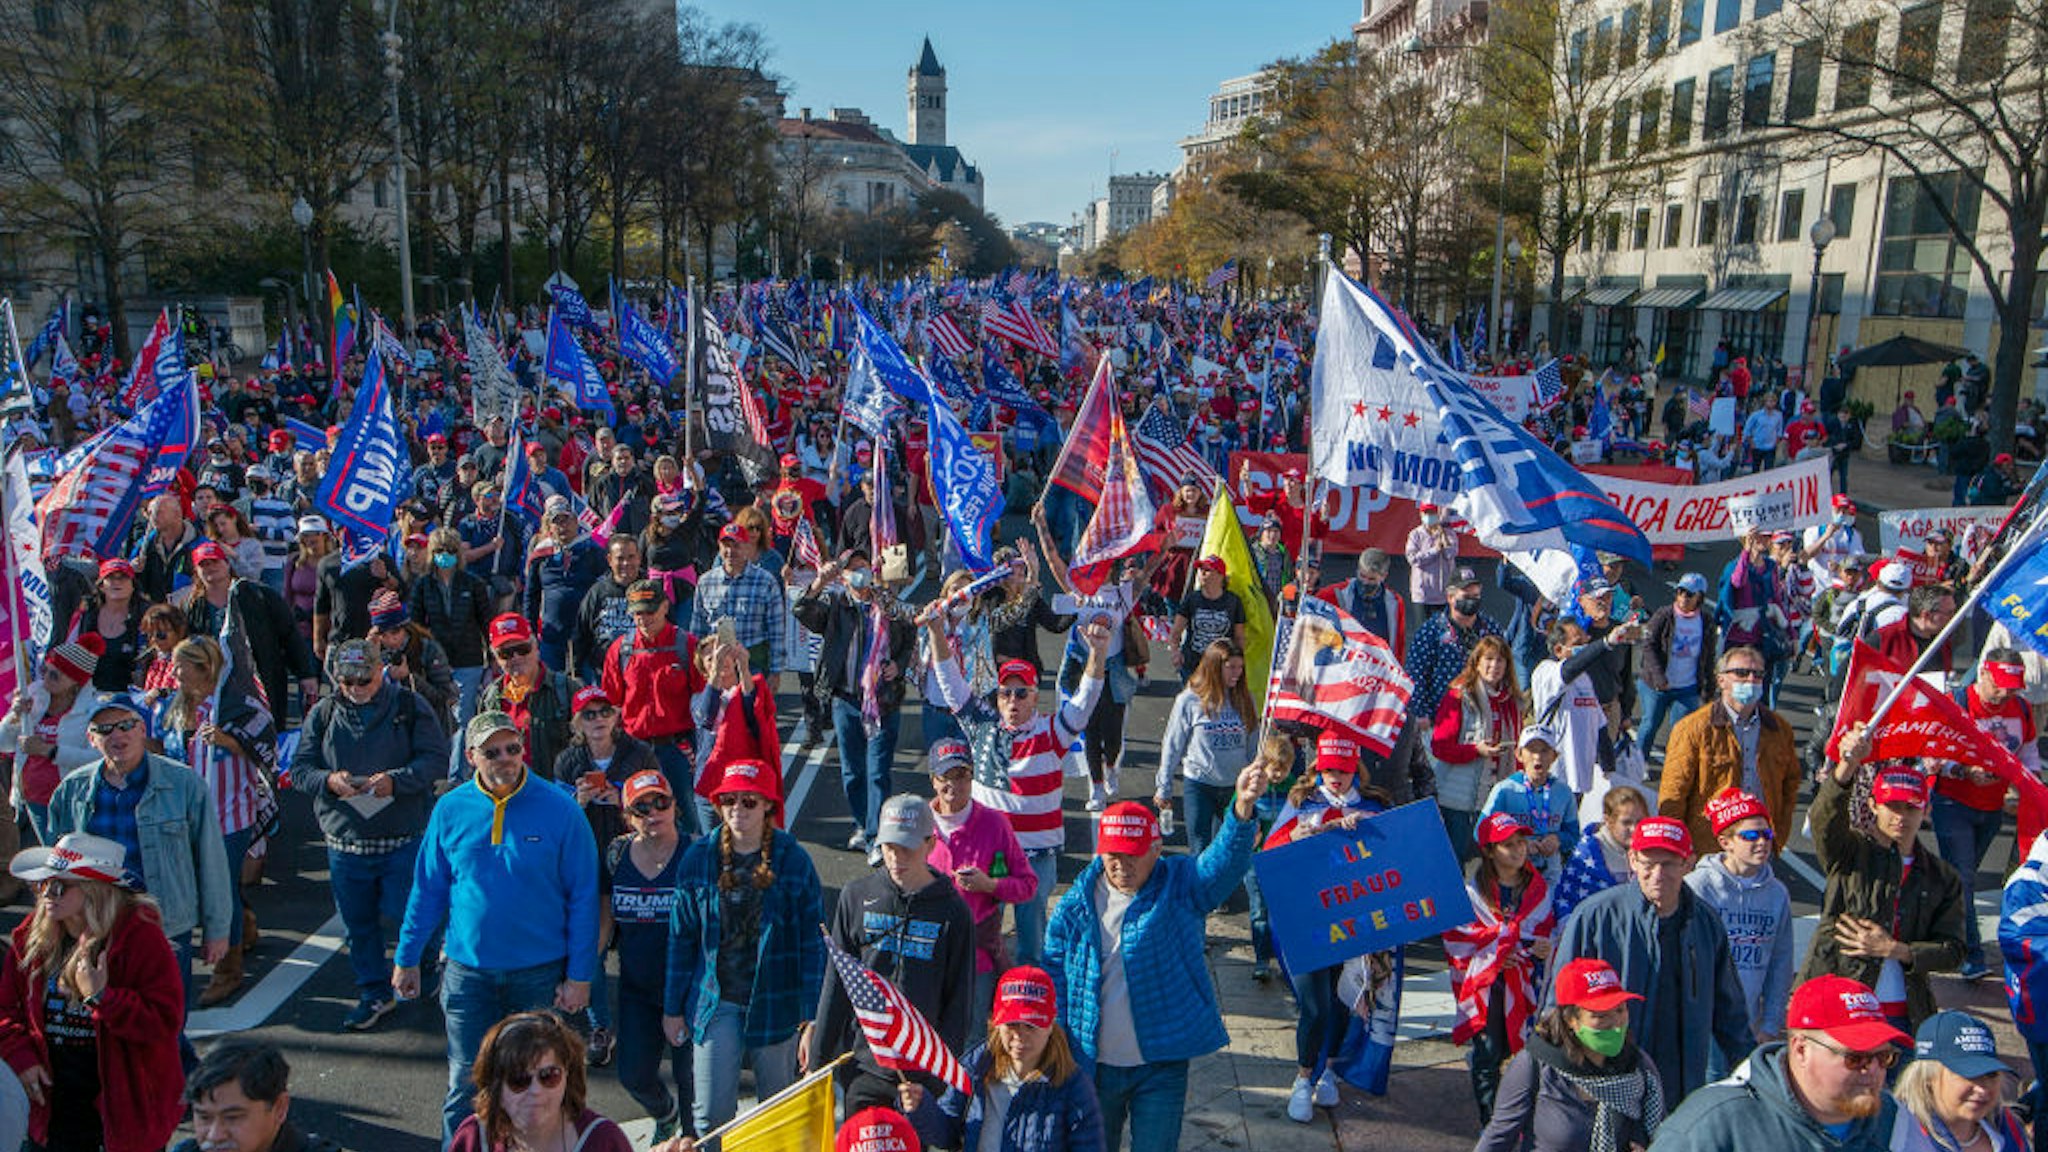 Thousands of supporters of President Trump march along Pennsylvania Avenue towards the Supreme Court during the Million MAGA March rally in Washington, DC, on November 14, 2020. (Photo by Craig Hudson for The Washington Post via Getty Images)